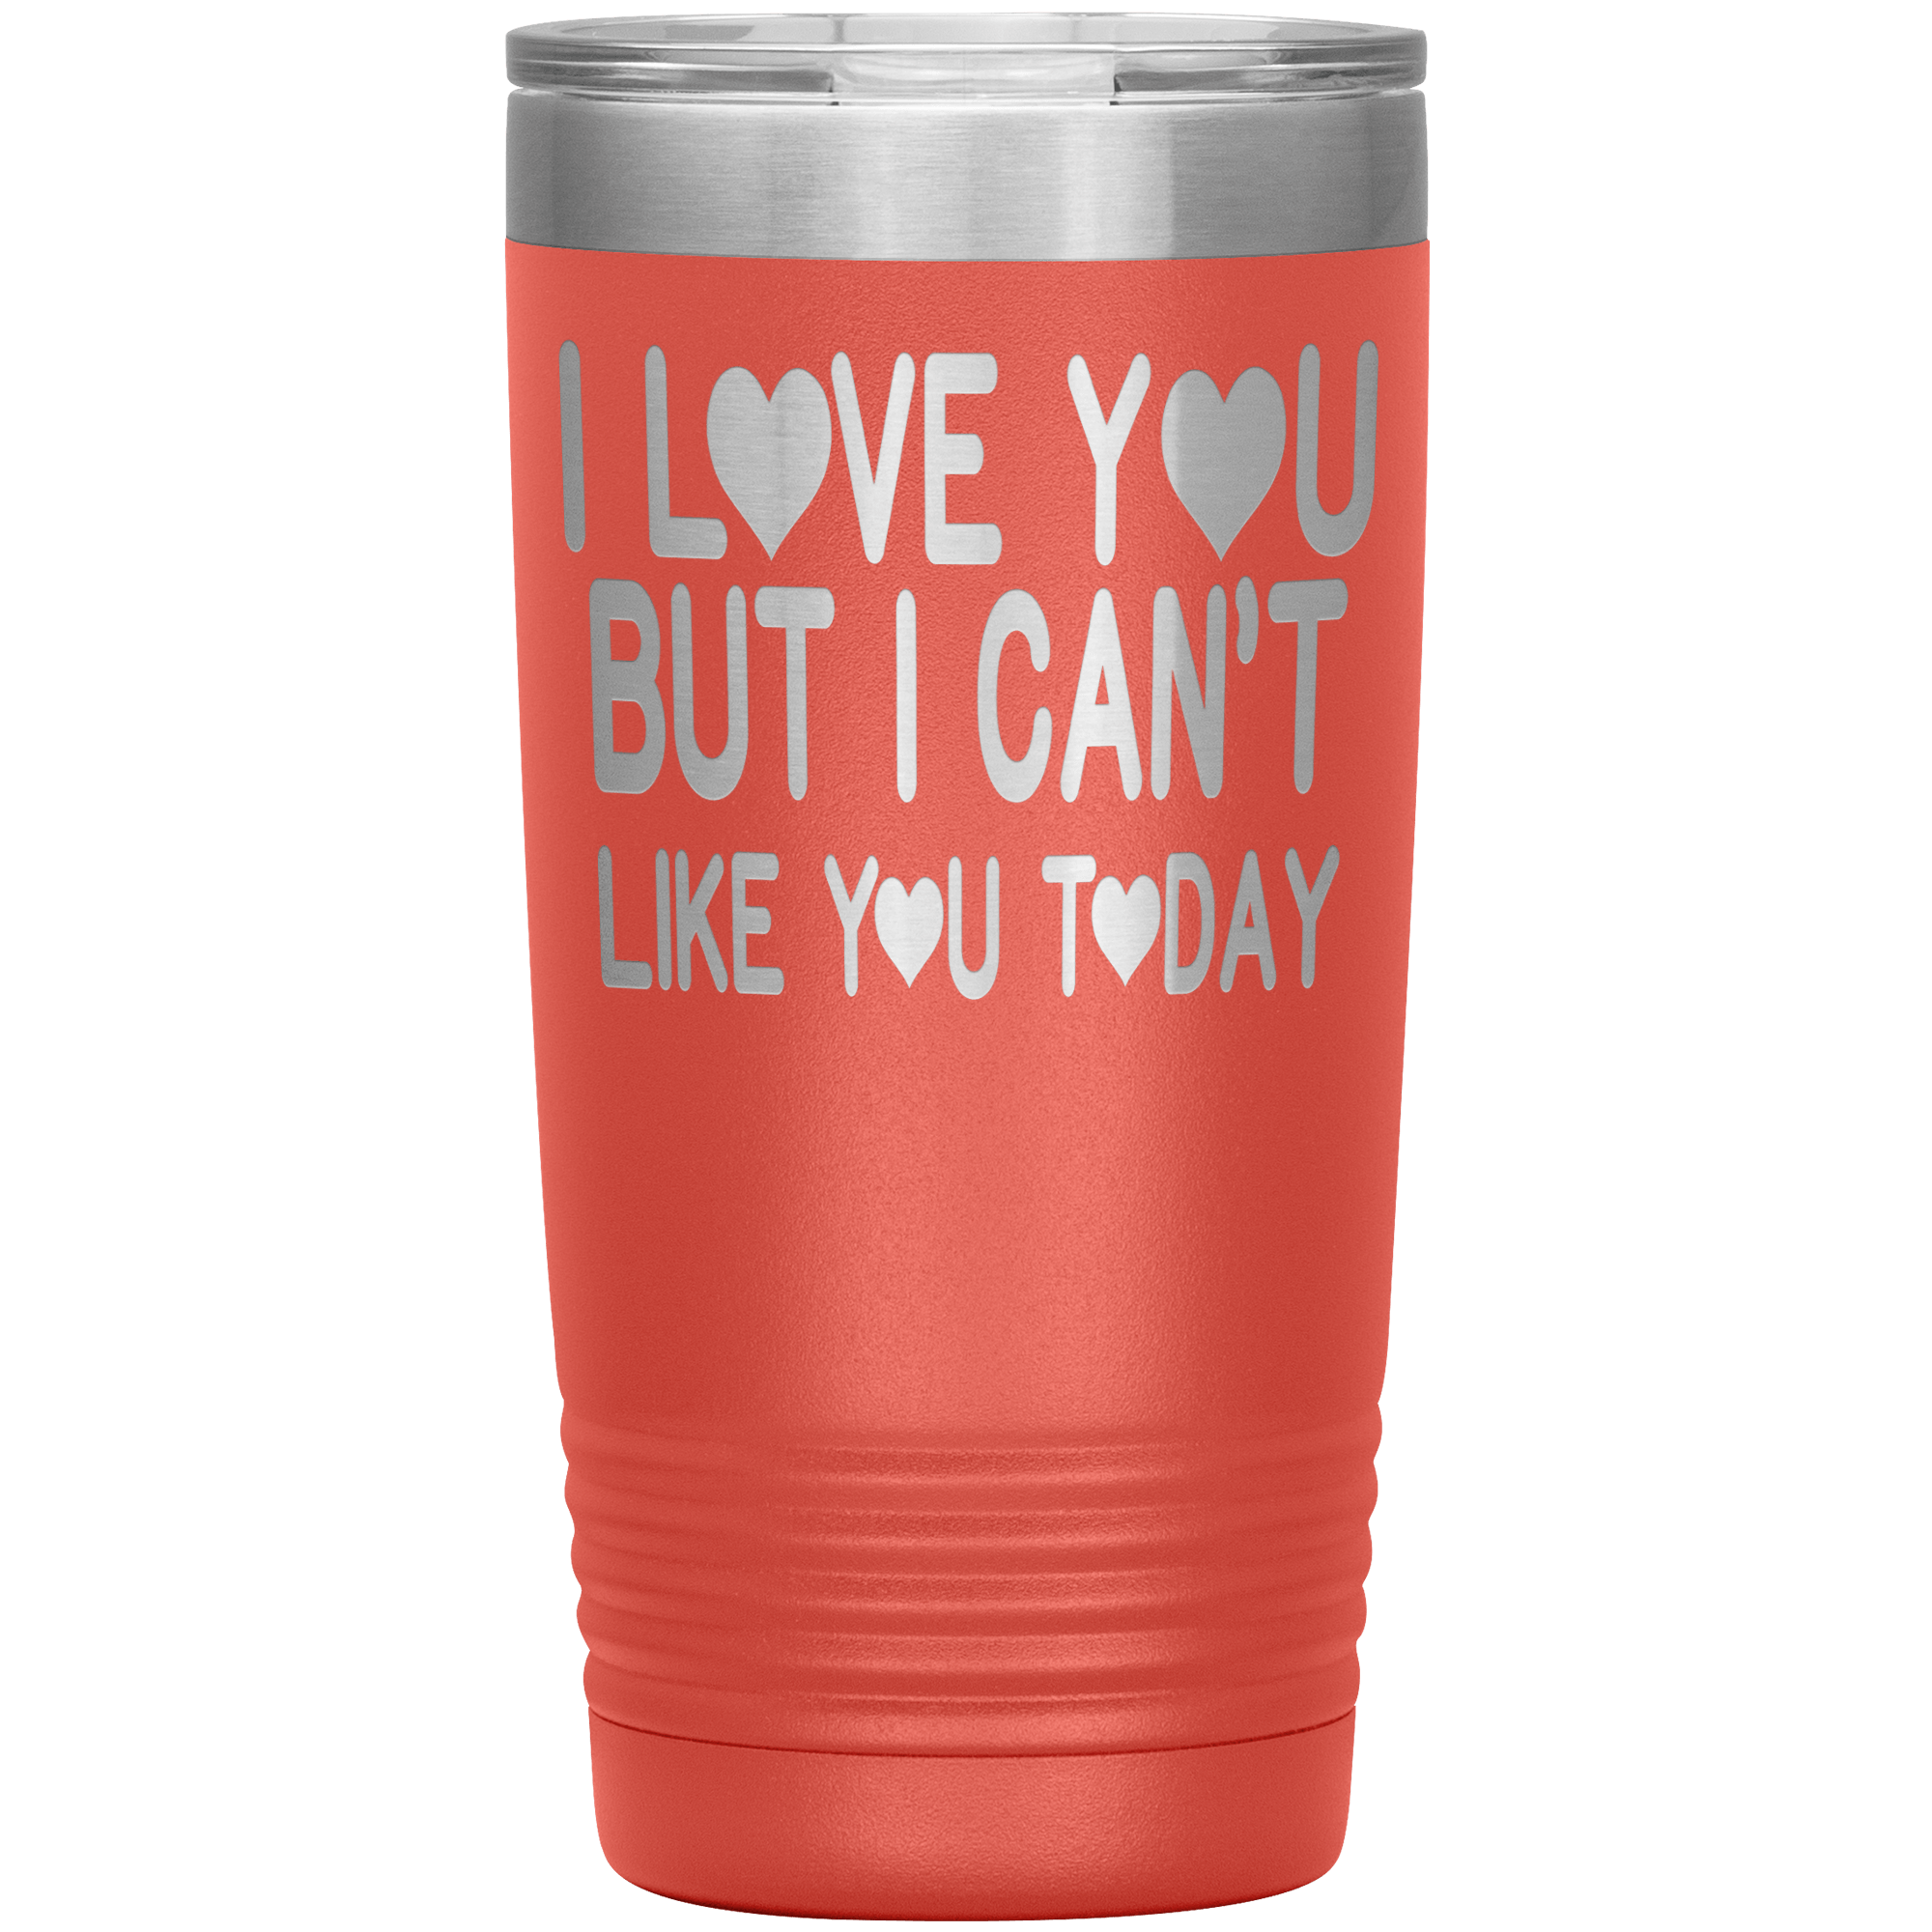 I LOVE YOU BUT I CAN'T LIKE YOU TODAY - TUMBLER